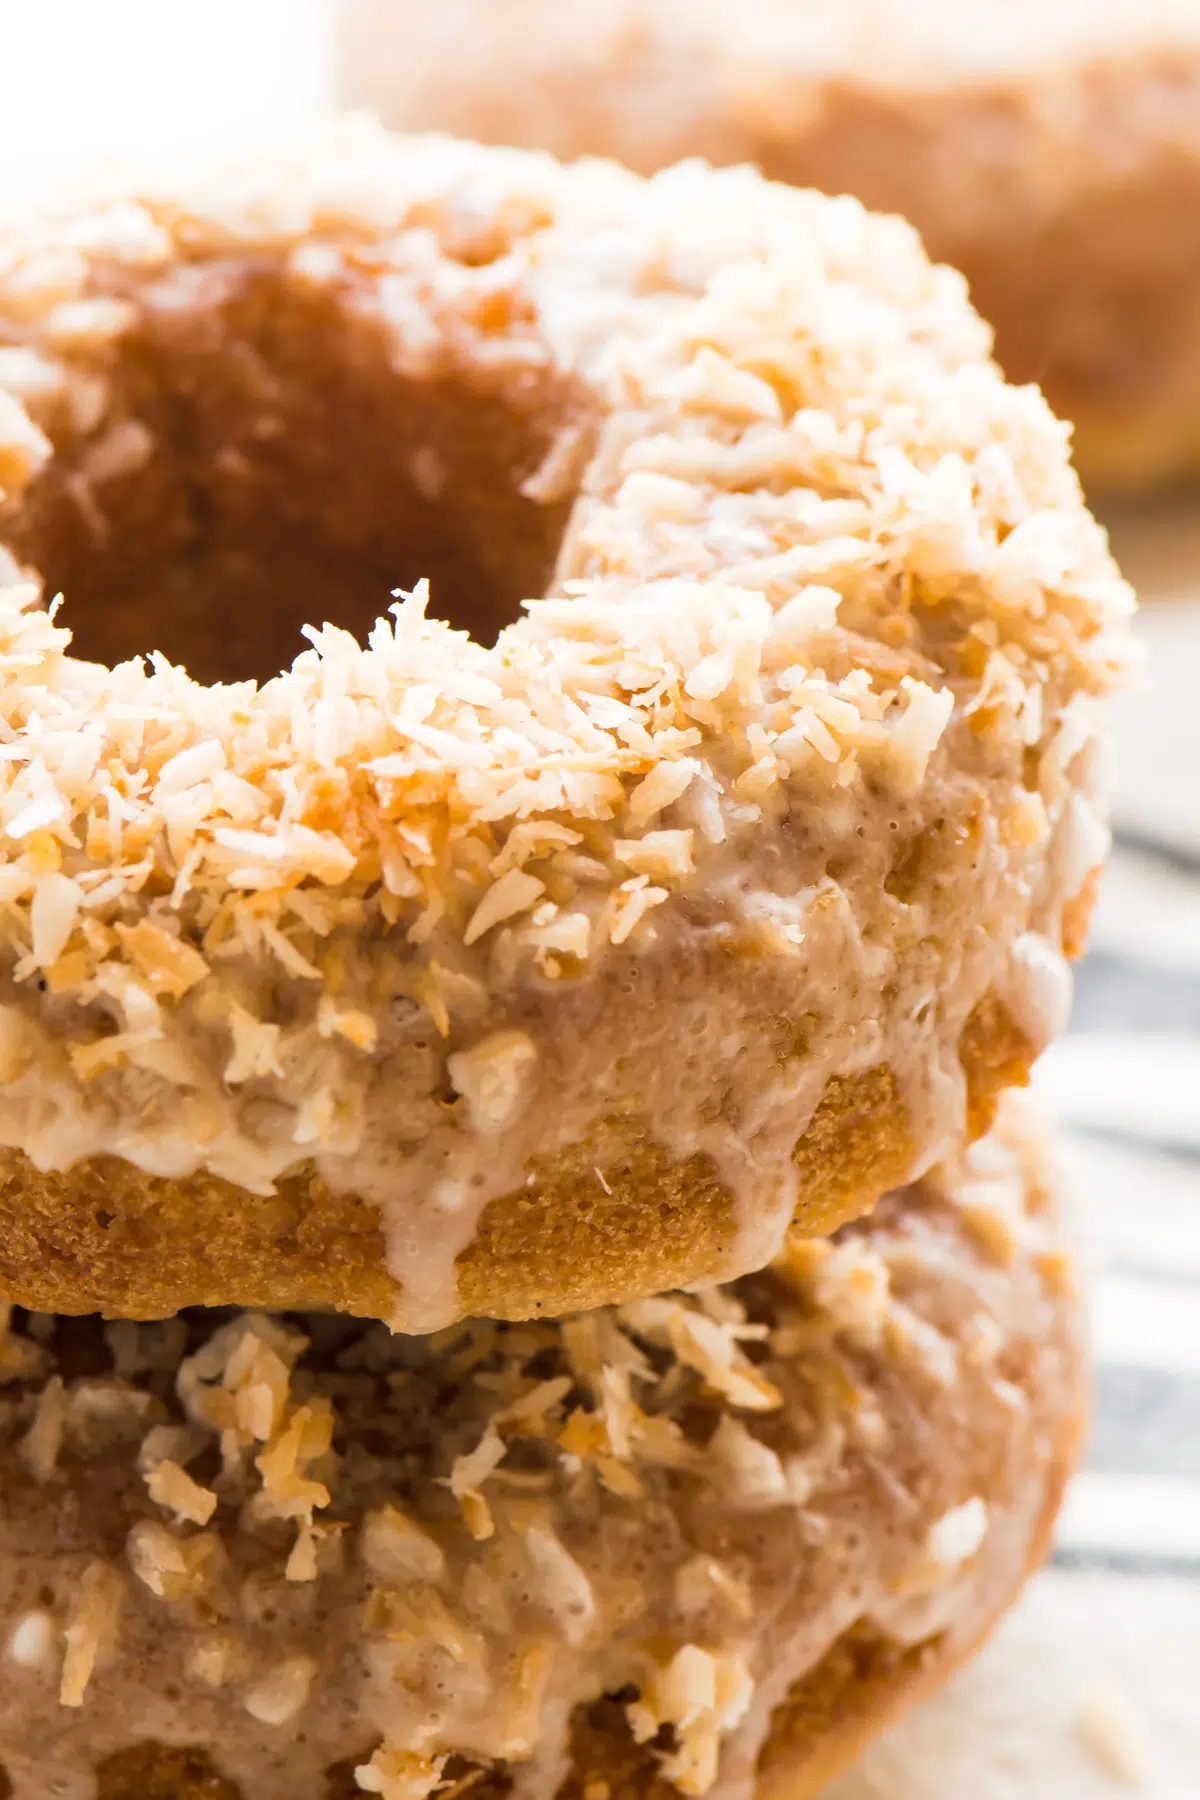 A closeup of a stack of coconut donuts.